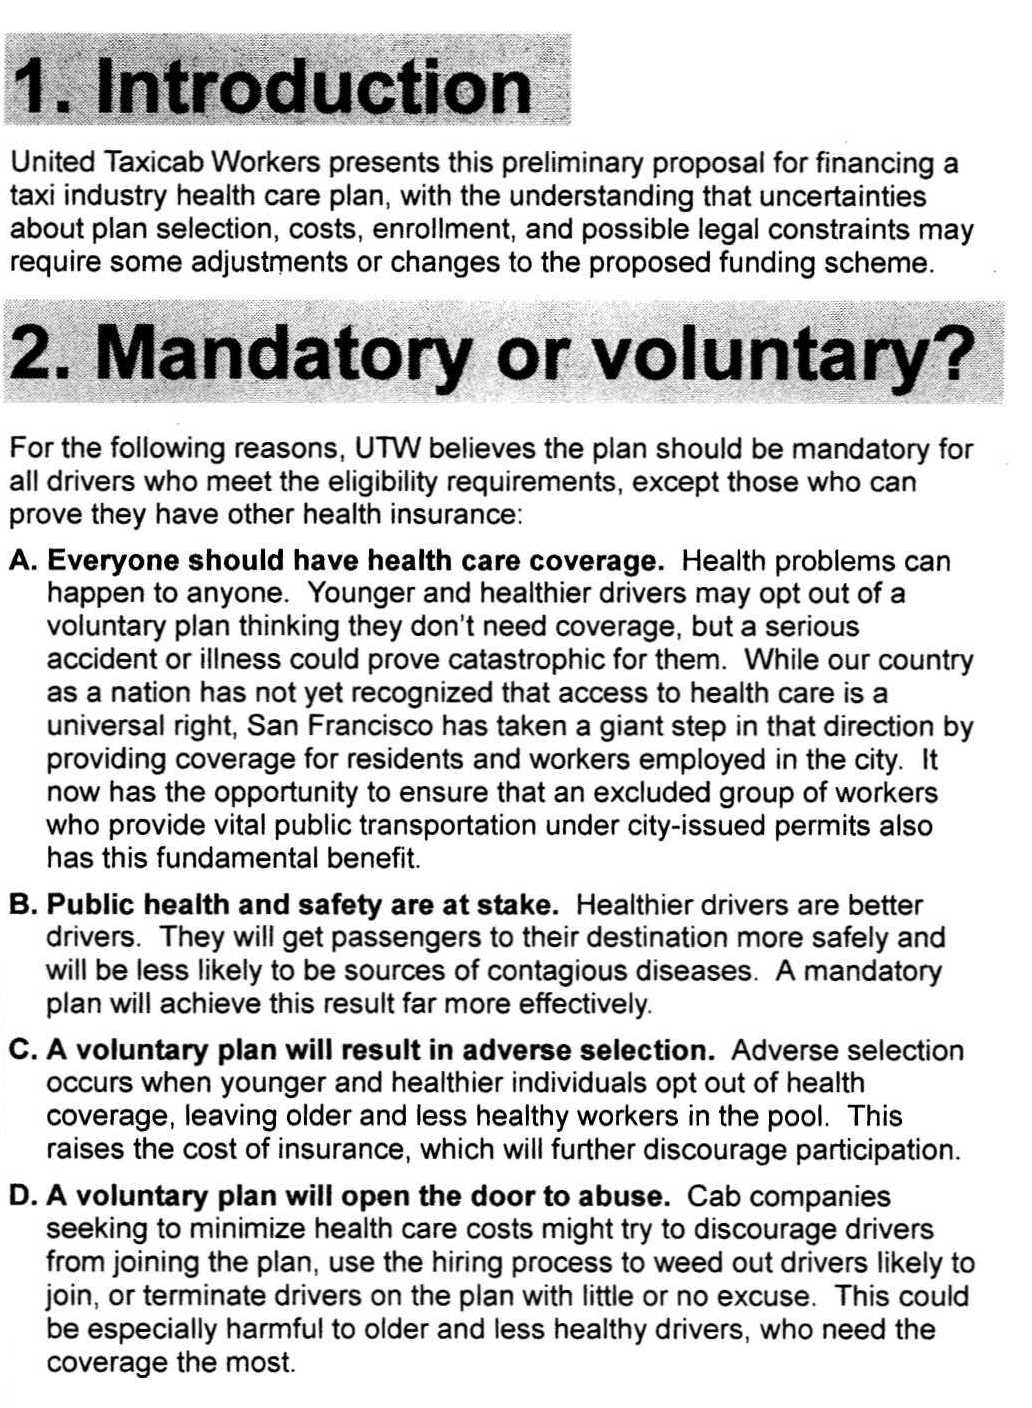 Page 1 of UTW document on Health Care, December 2006